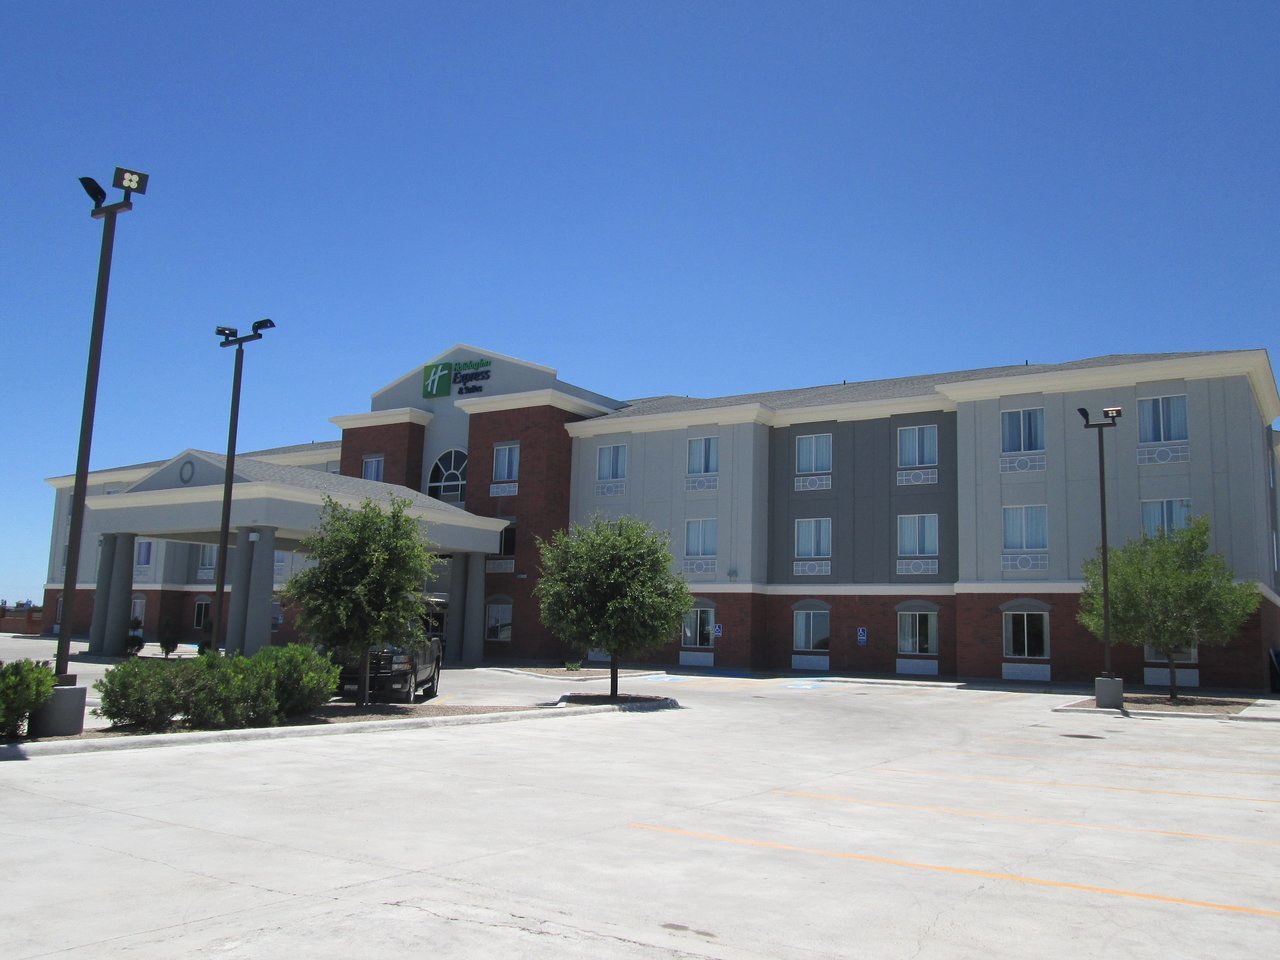 Photo of Holiday Inn Express & Suites Fort Stockton, Fort Stockton, TX